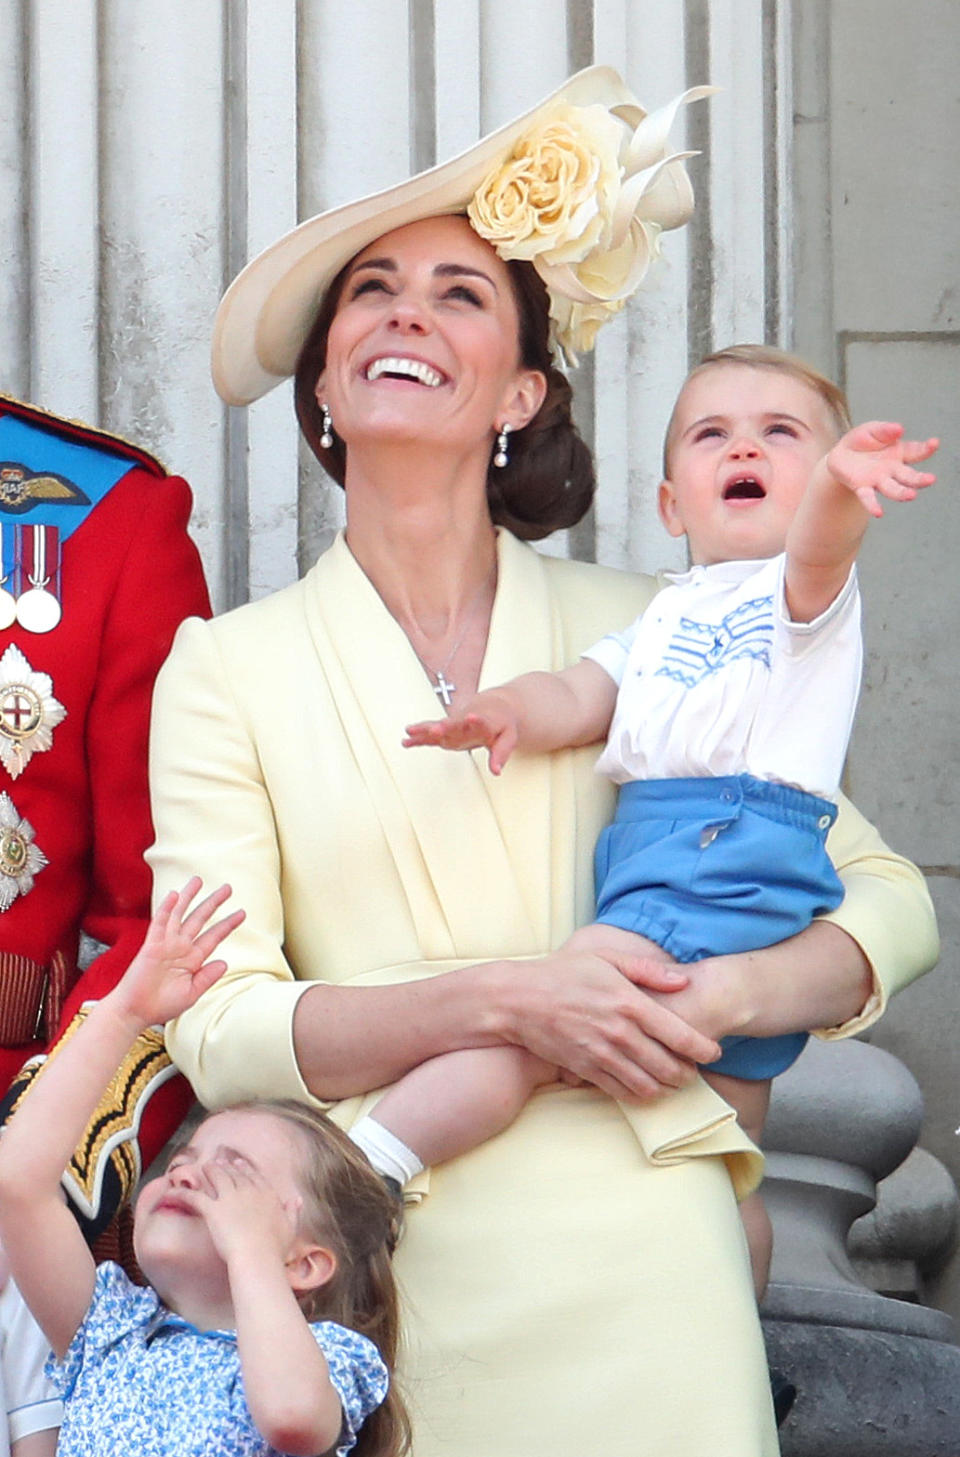 LONDON, ENGLAND - JUNE 08: Princess Charlotte, Catherine, Duchess of Cambridge and Prince Louis during Trooping The Colour, the Queen's annual birthday parade, on June 08, 2019 in London, England. (Photo by Chris Jackson/Getty Images)